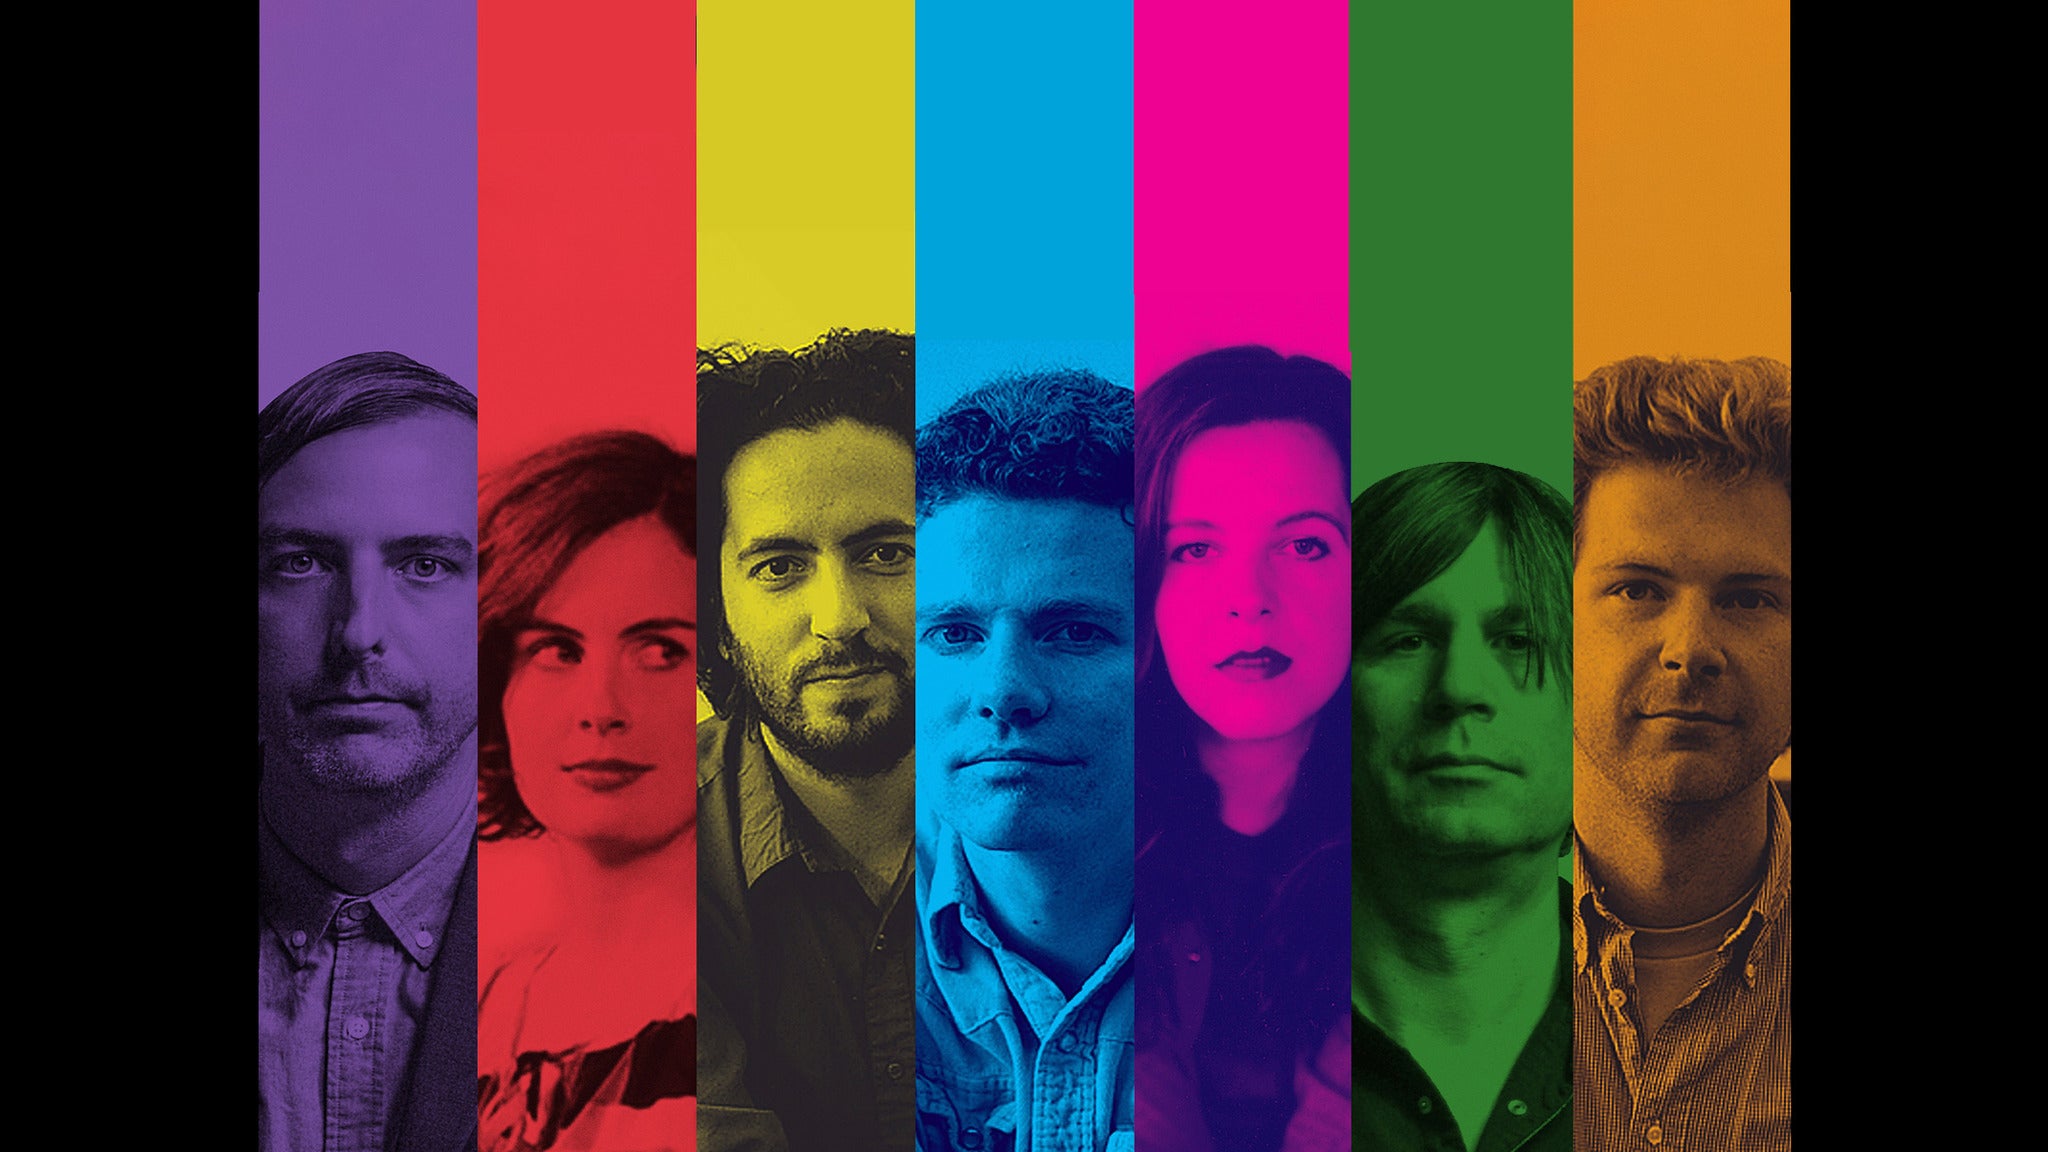 The New Pornographers - Performing the album 'Twin Cinema' presale password for early tickets in Los Angeles